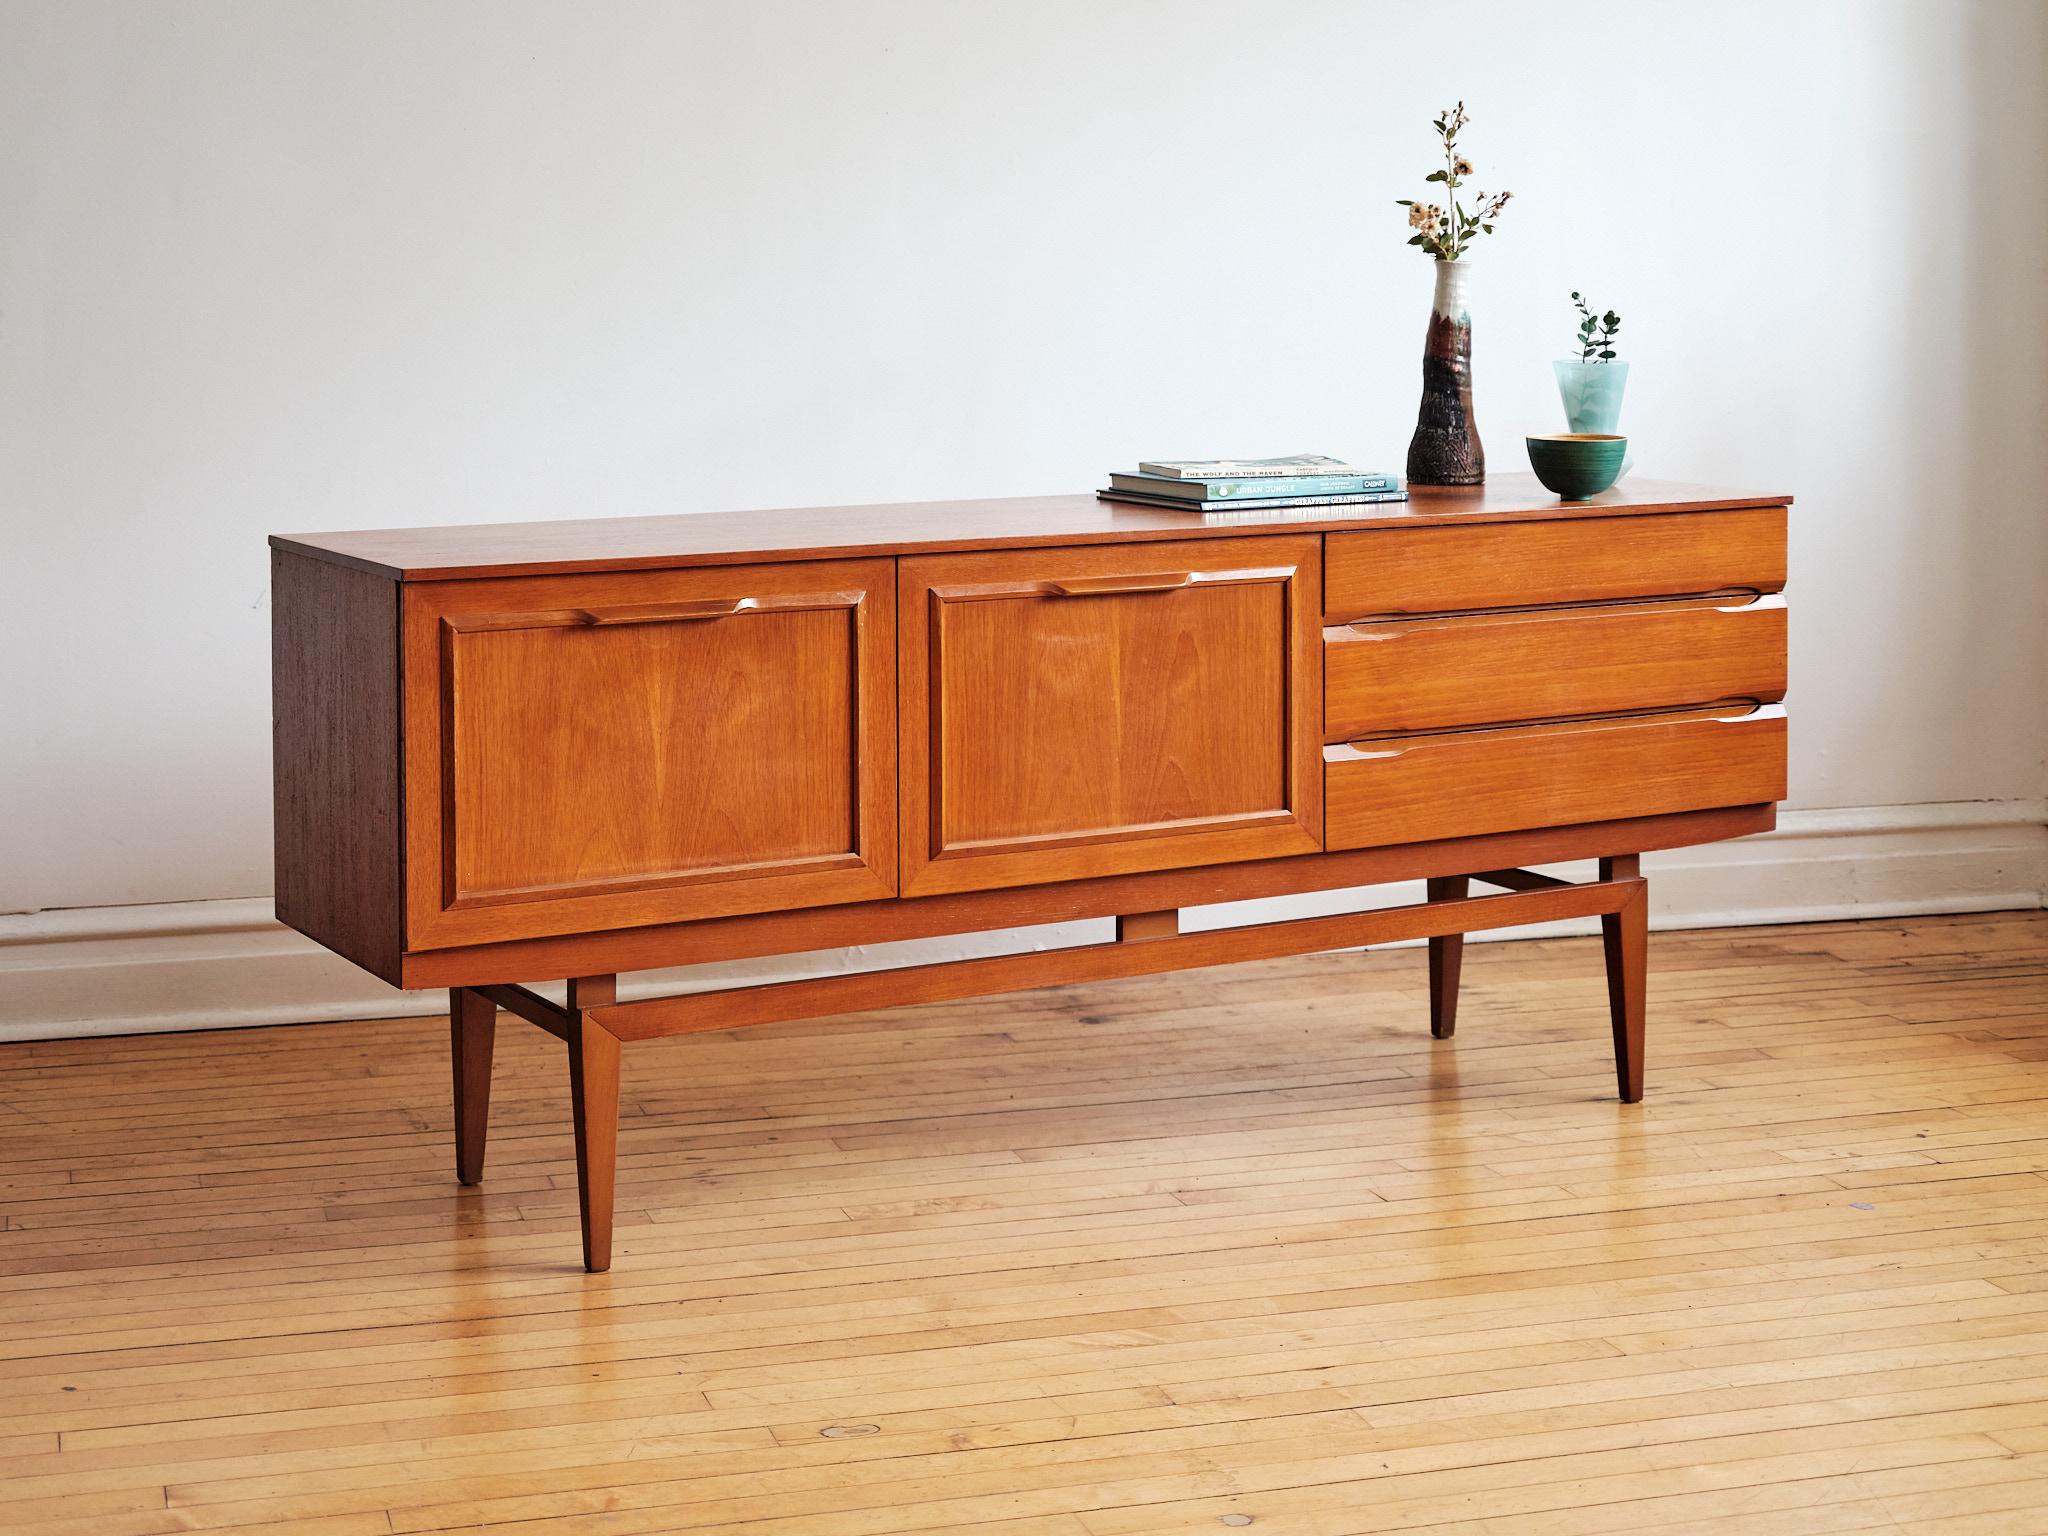 Mid-century Danish Modern floating teakwood sideboard.
Just imported from England to Chicago. 
Unknown designer.
This piece includes three drawers; the top drawer holds dividers.
Two cabinets hold shelving inside; the center cabinet is a drop